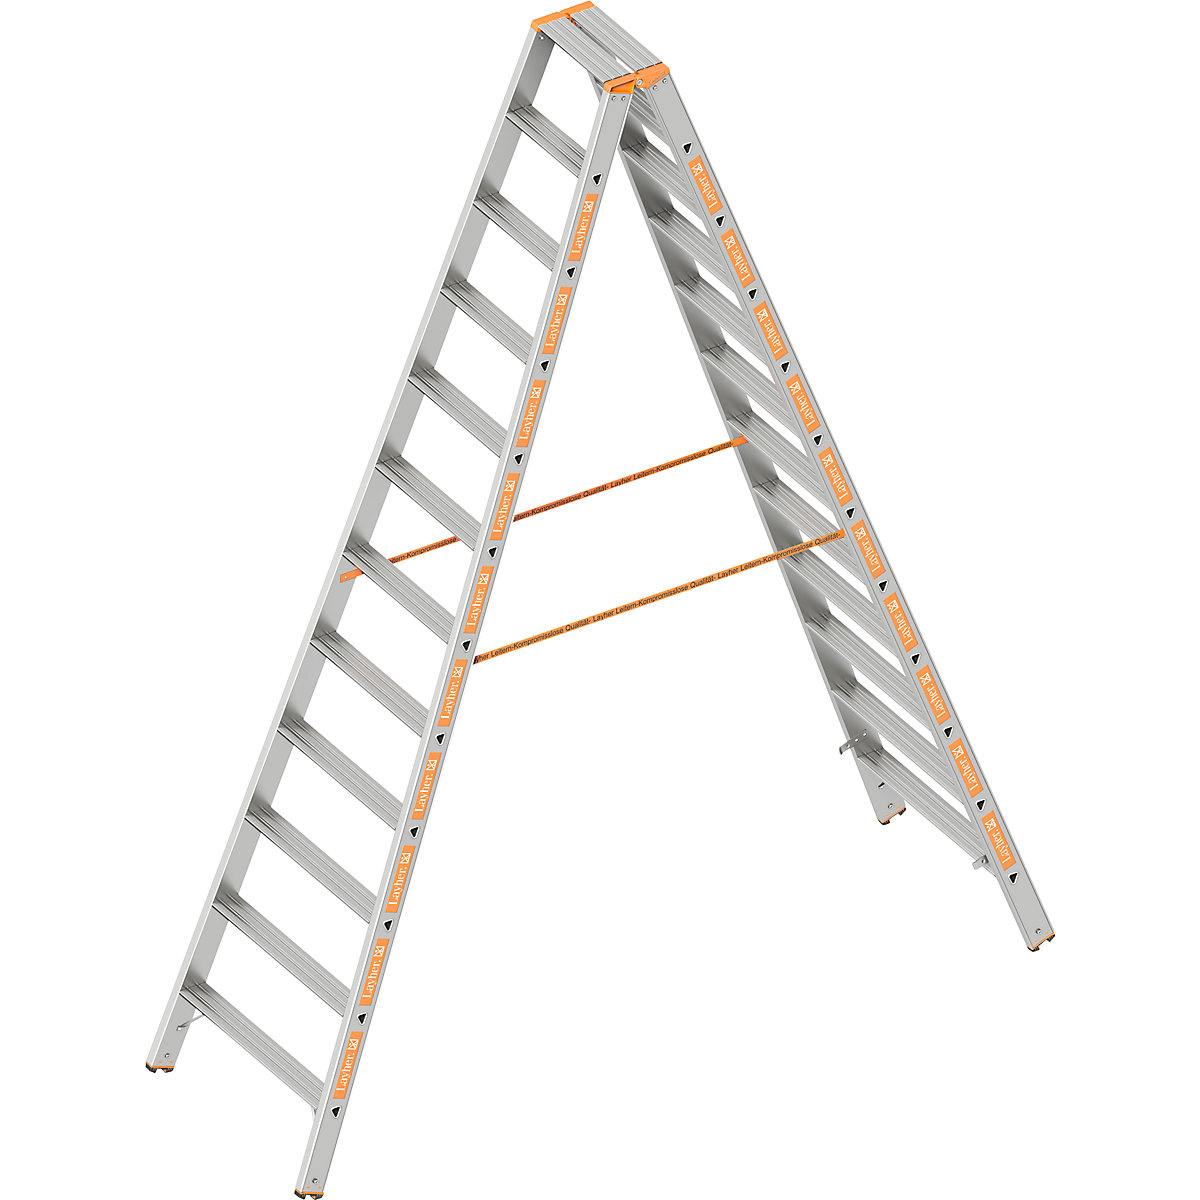 Step ladder – Layher, double sided access, 2 x 12 steps-5